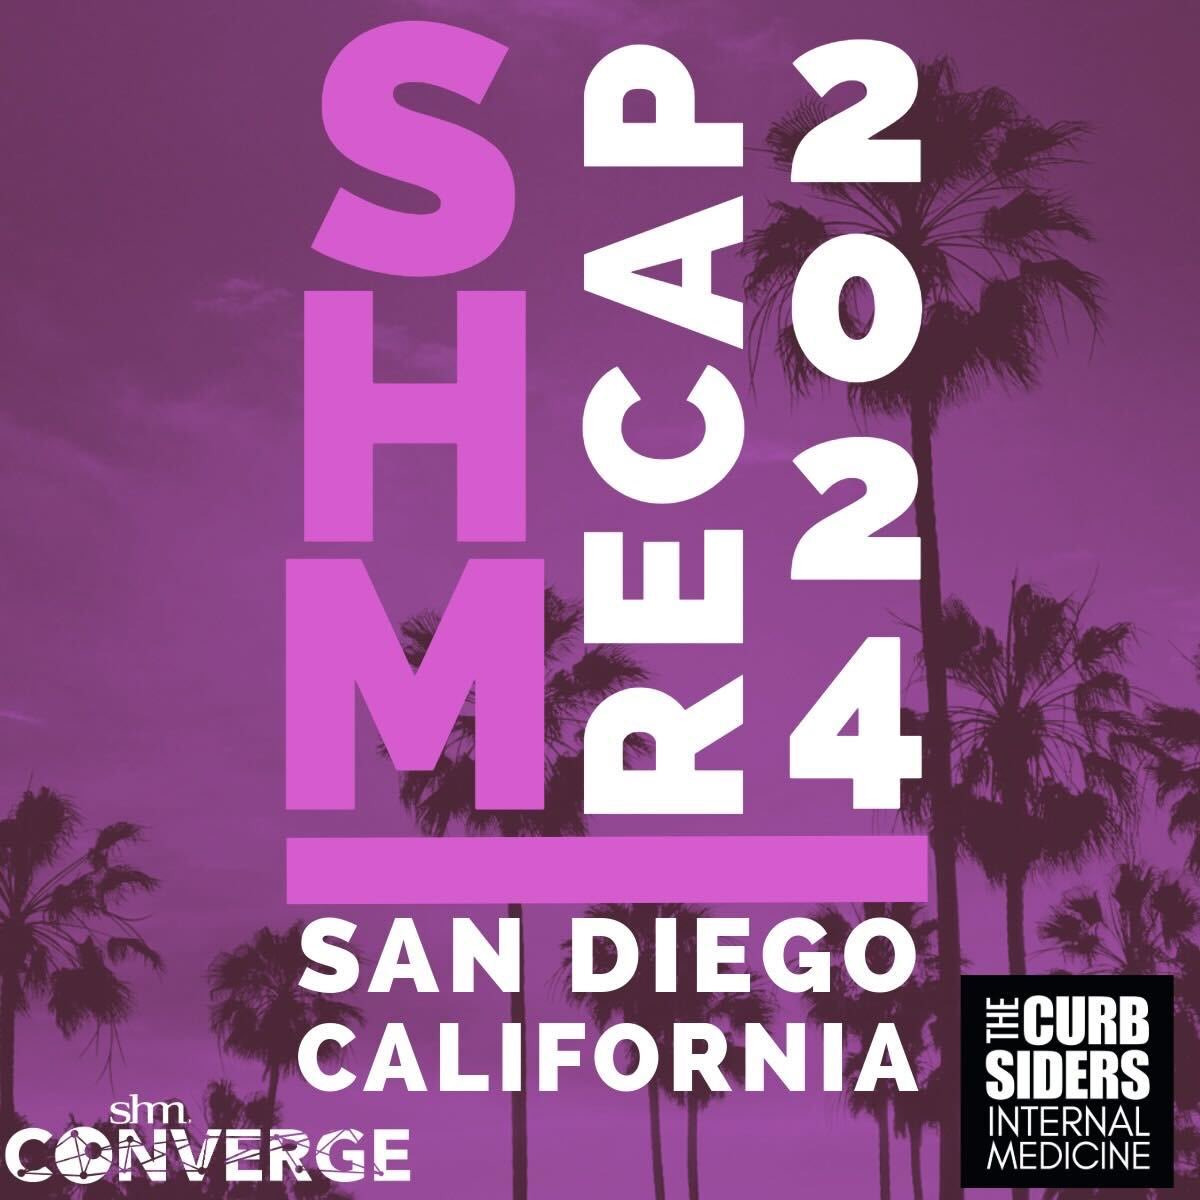 🏄‍♀️ #438 Recap from SHM #Converge24 We went to it so you don’t have to! ⭐️We recap the top pearls for the hospitalist from #SHM #Converge24 covering discussions on heart failure, gastrointestinal bleeds, and more! @SocietyHospMed thecurbsiders.com/curbsiders-pod…